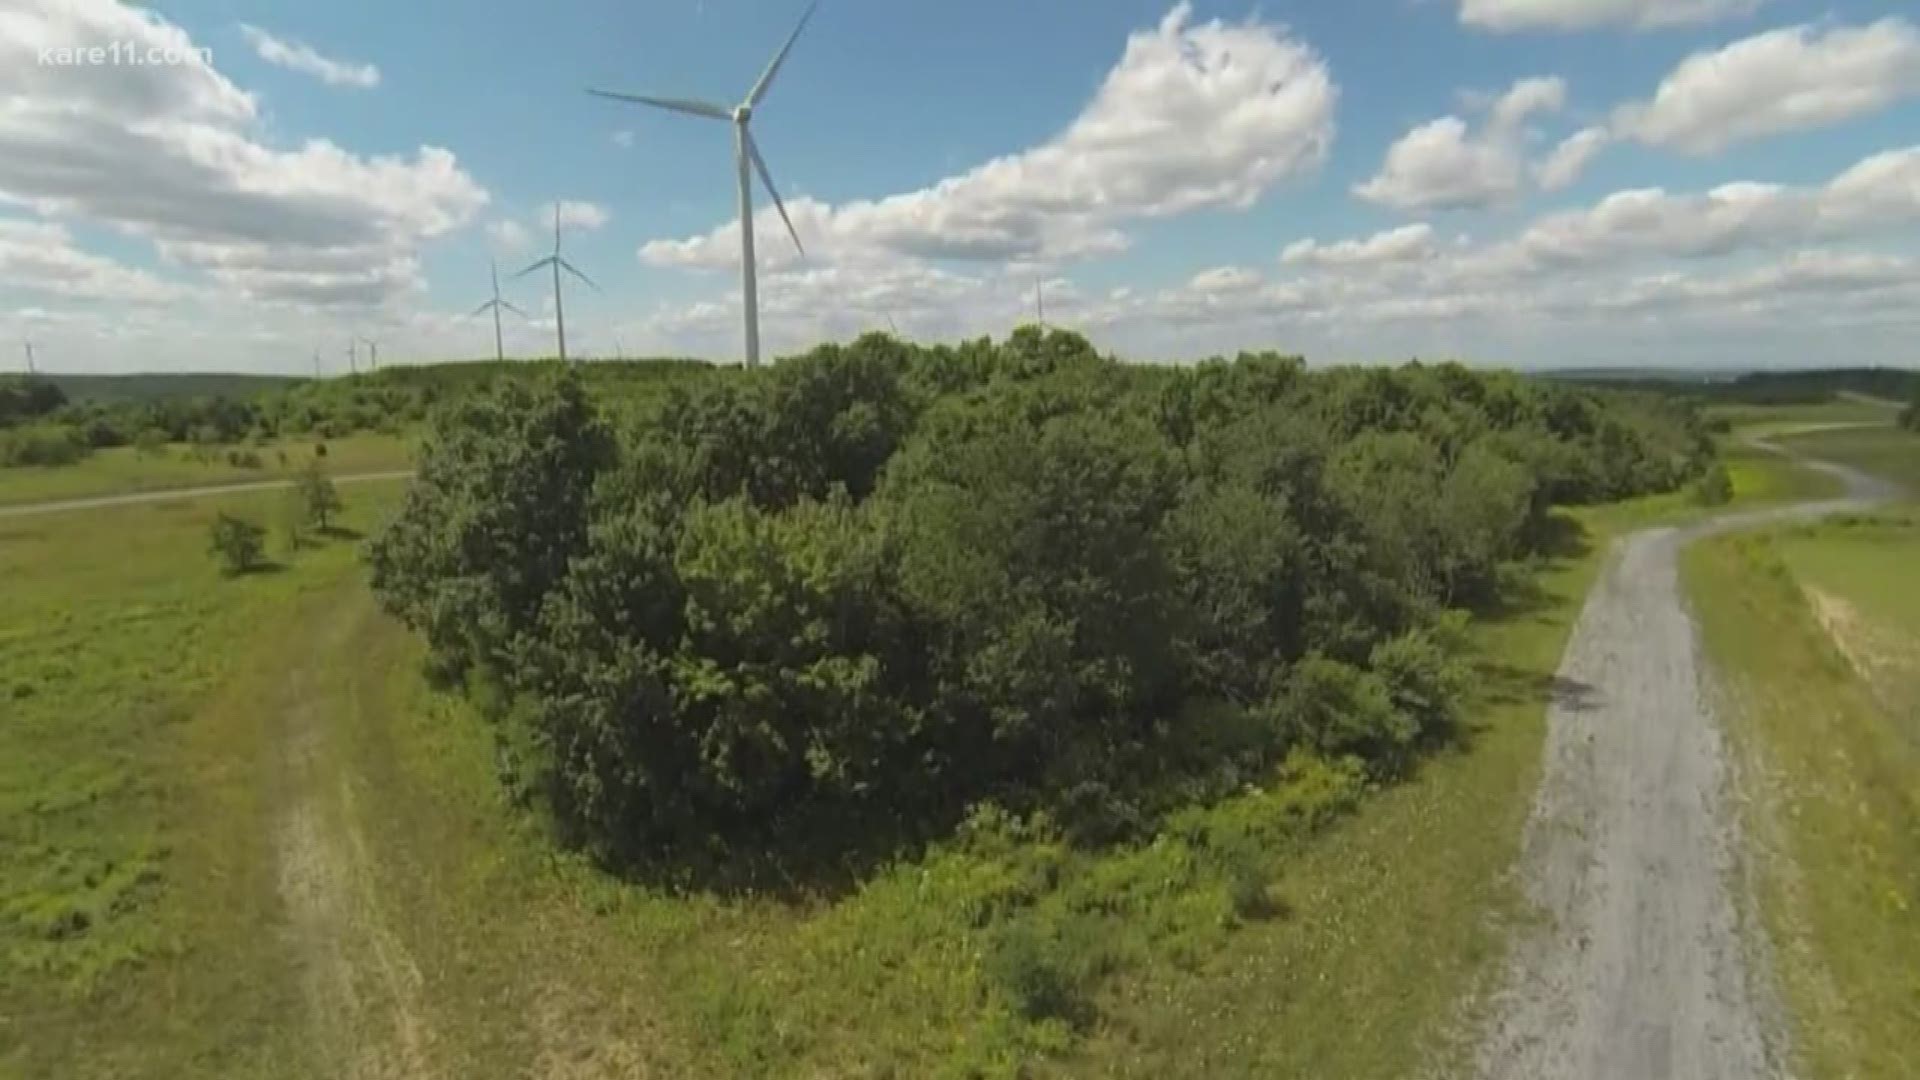 Green energy is 'growing' in Minnesota now employing tens of thousands of people.